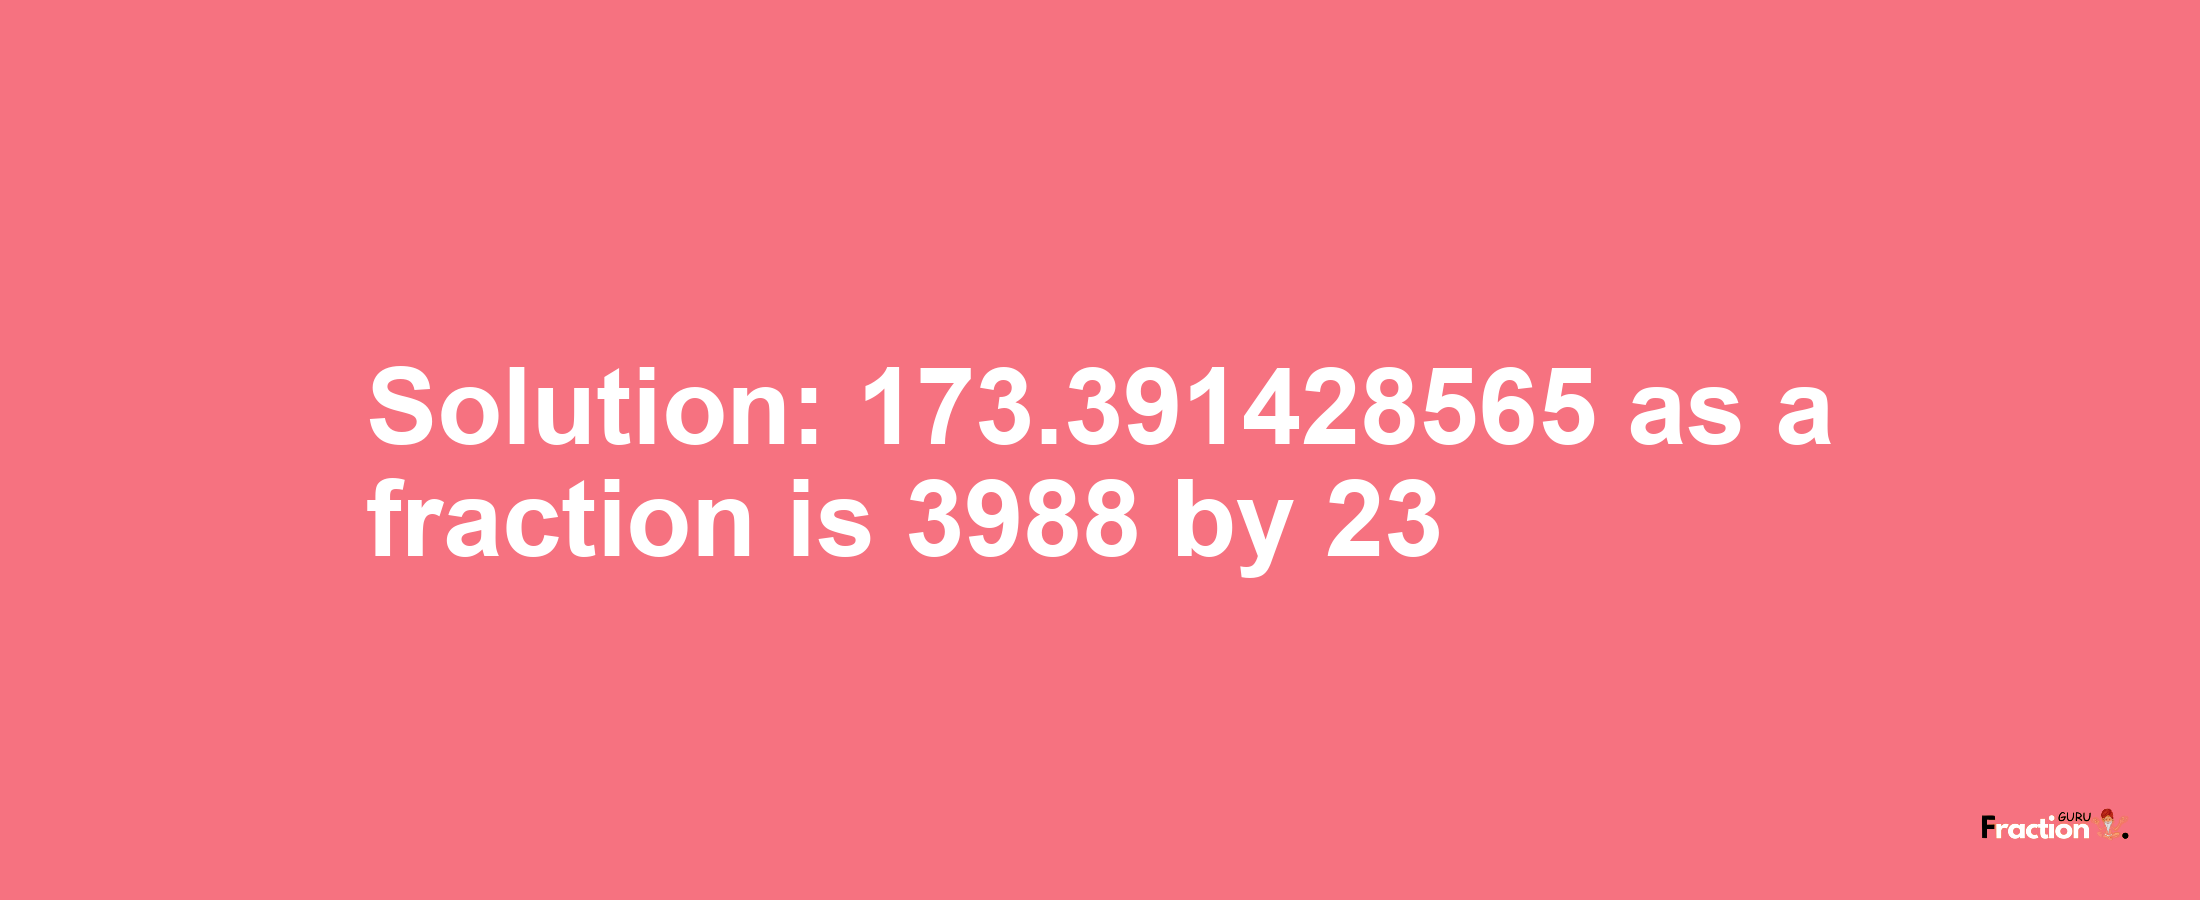 Solution:173.391428565 as a fraction is 3988/23